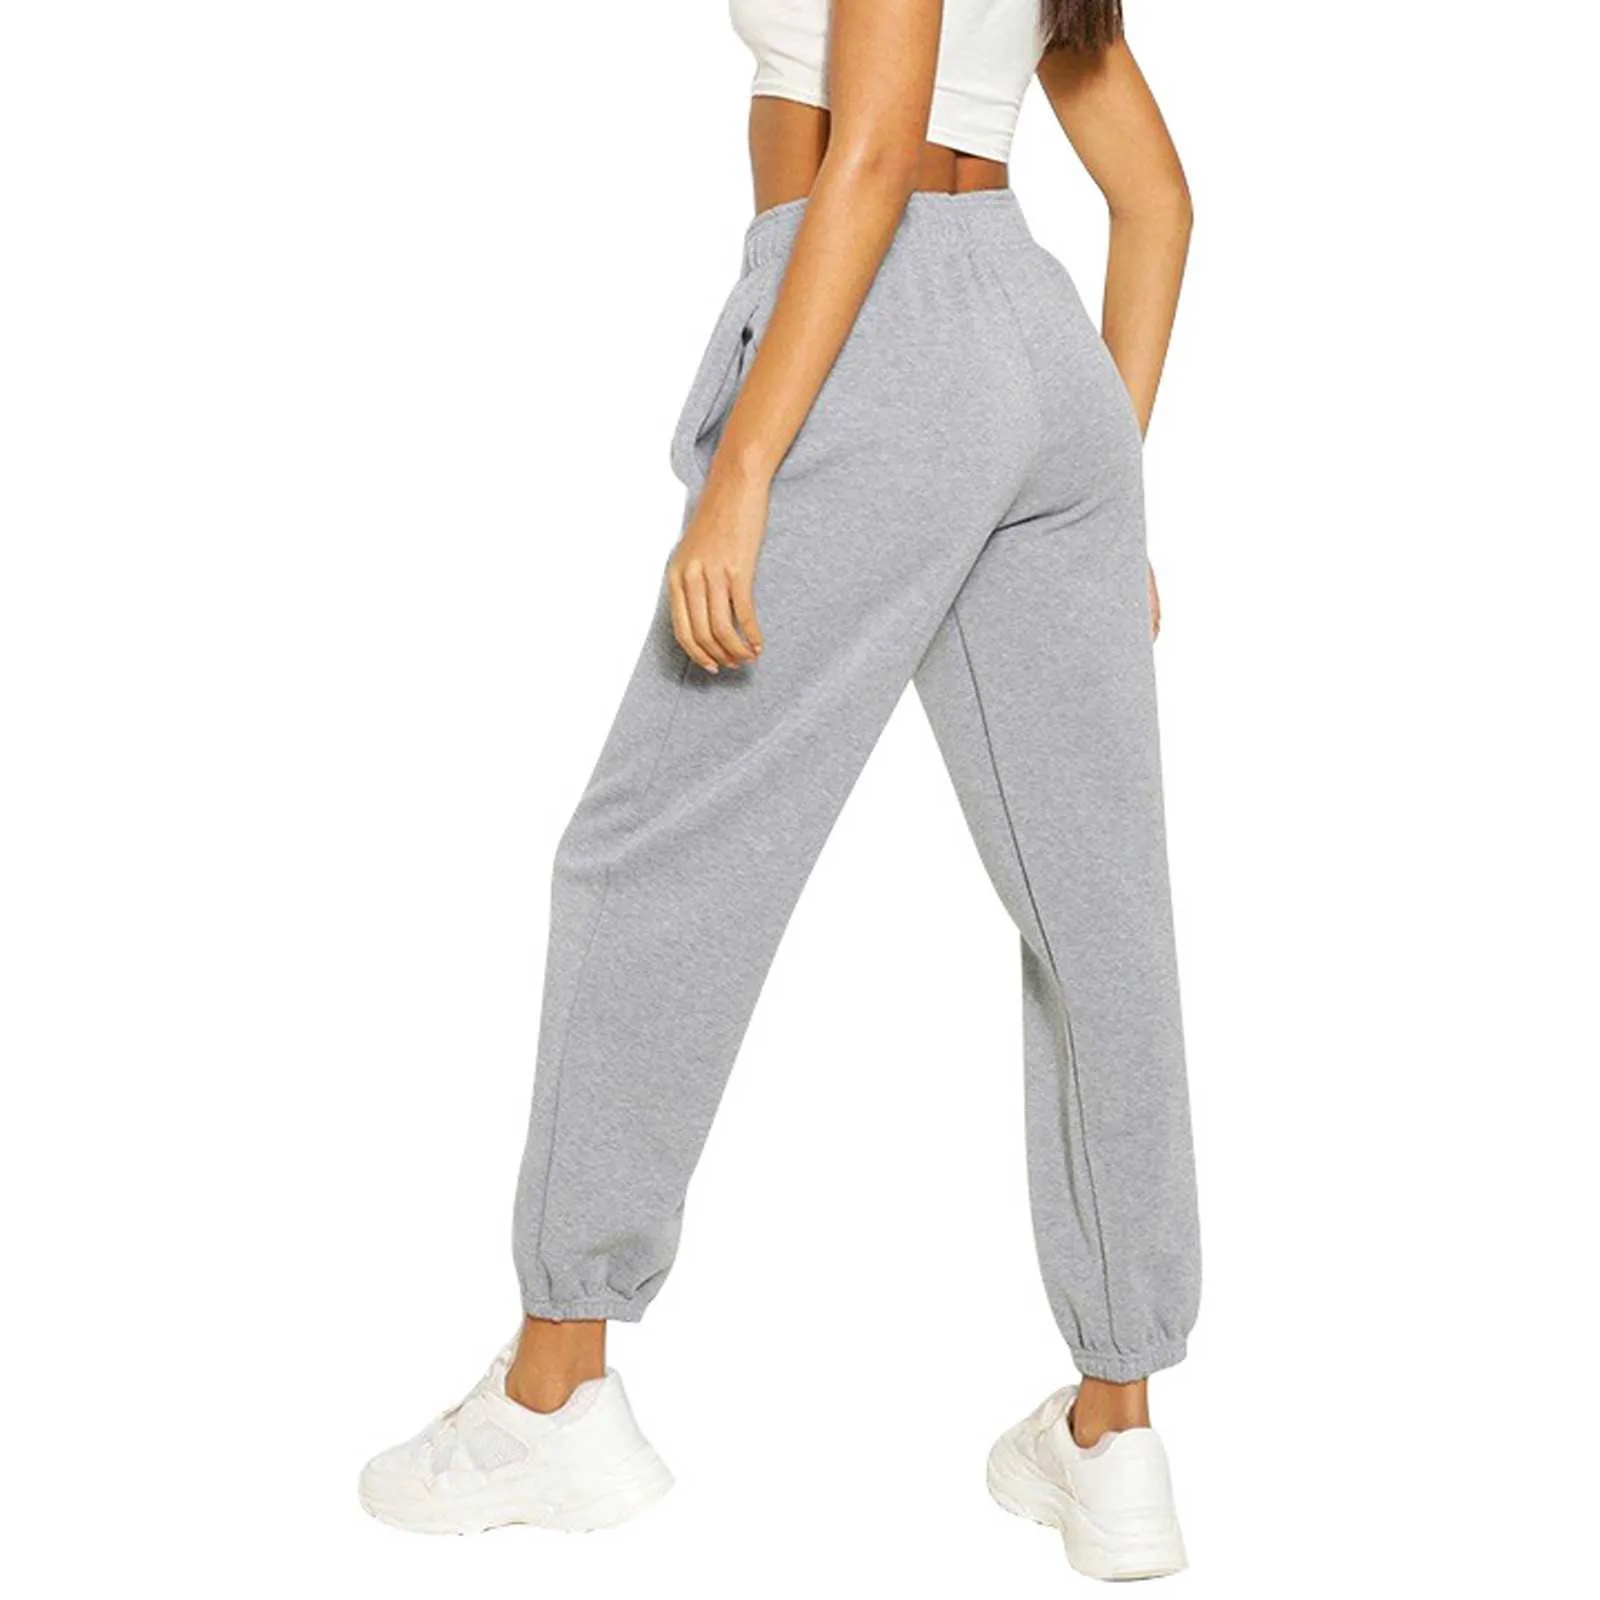 Women Pants Solid Loose Sweatpant High Quality Elastic Waist Trousers Womens Simple Leisure All-match Leisure Trousers#f30 Q0801